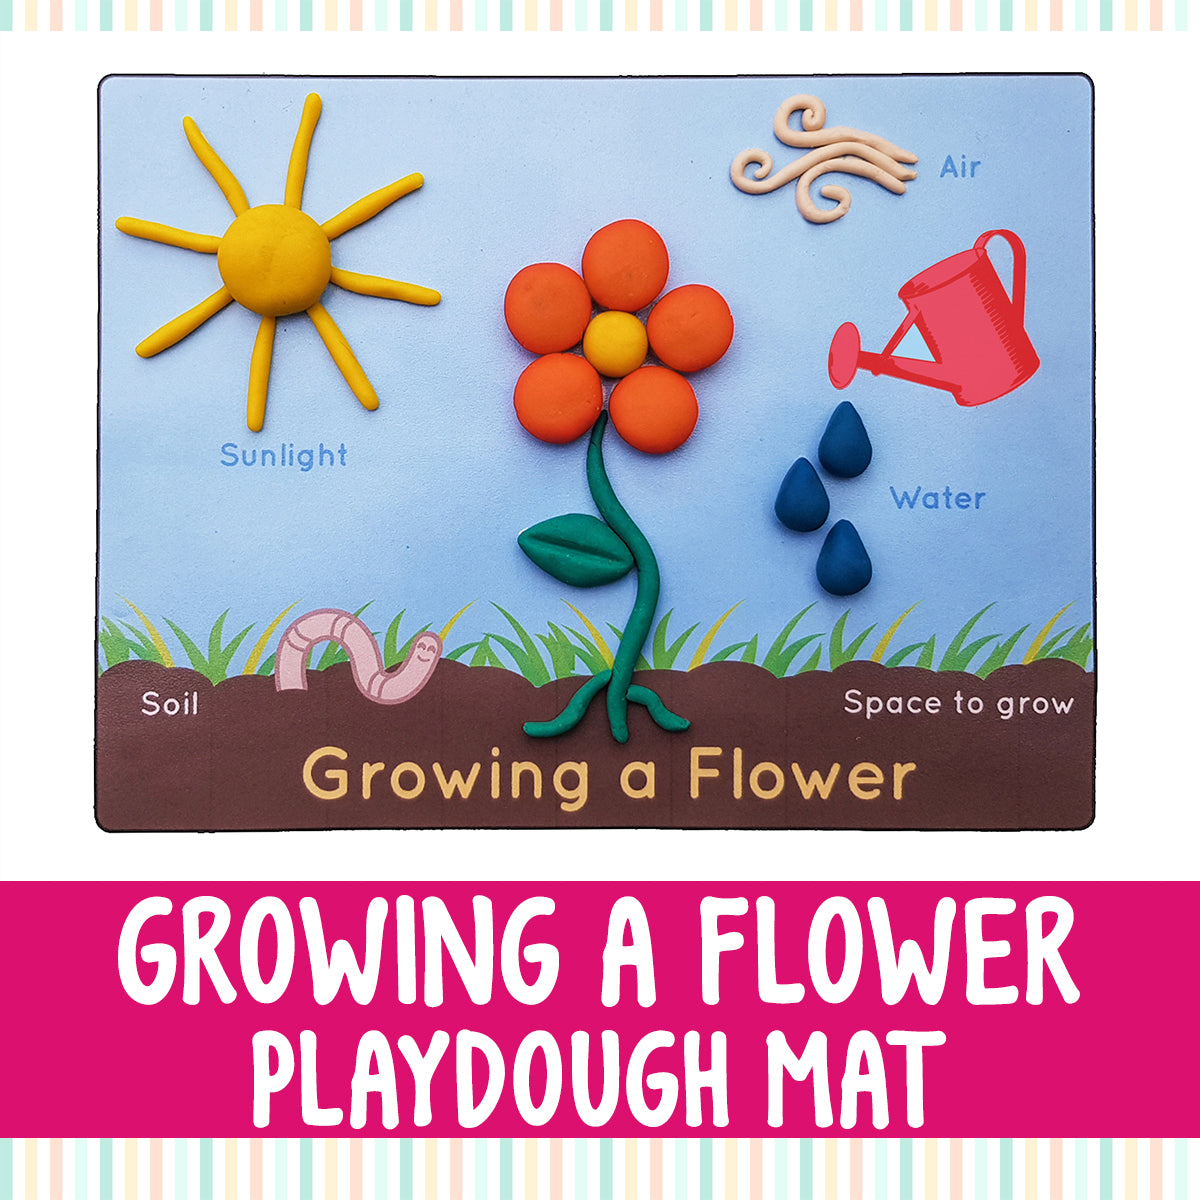 Flower Life Cycle Play Dough Mat for Sensory Play